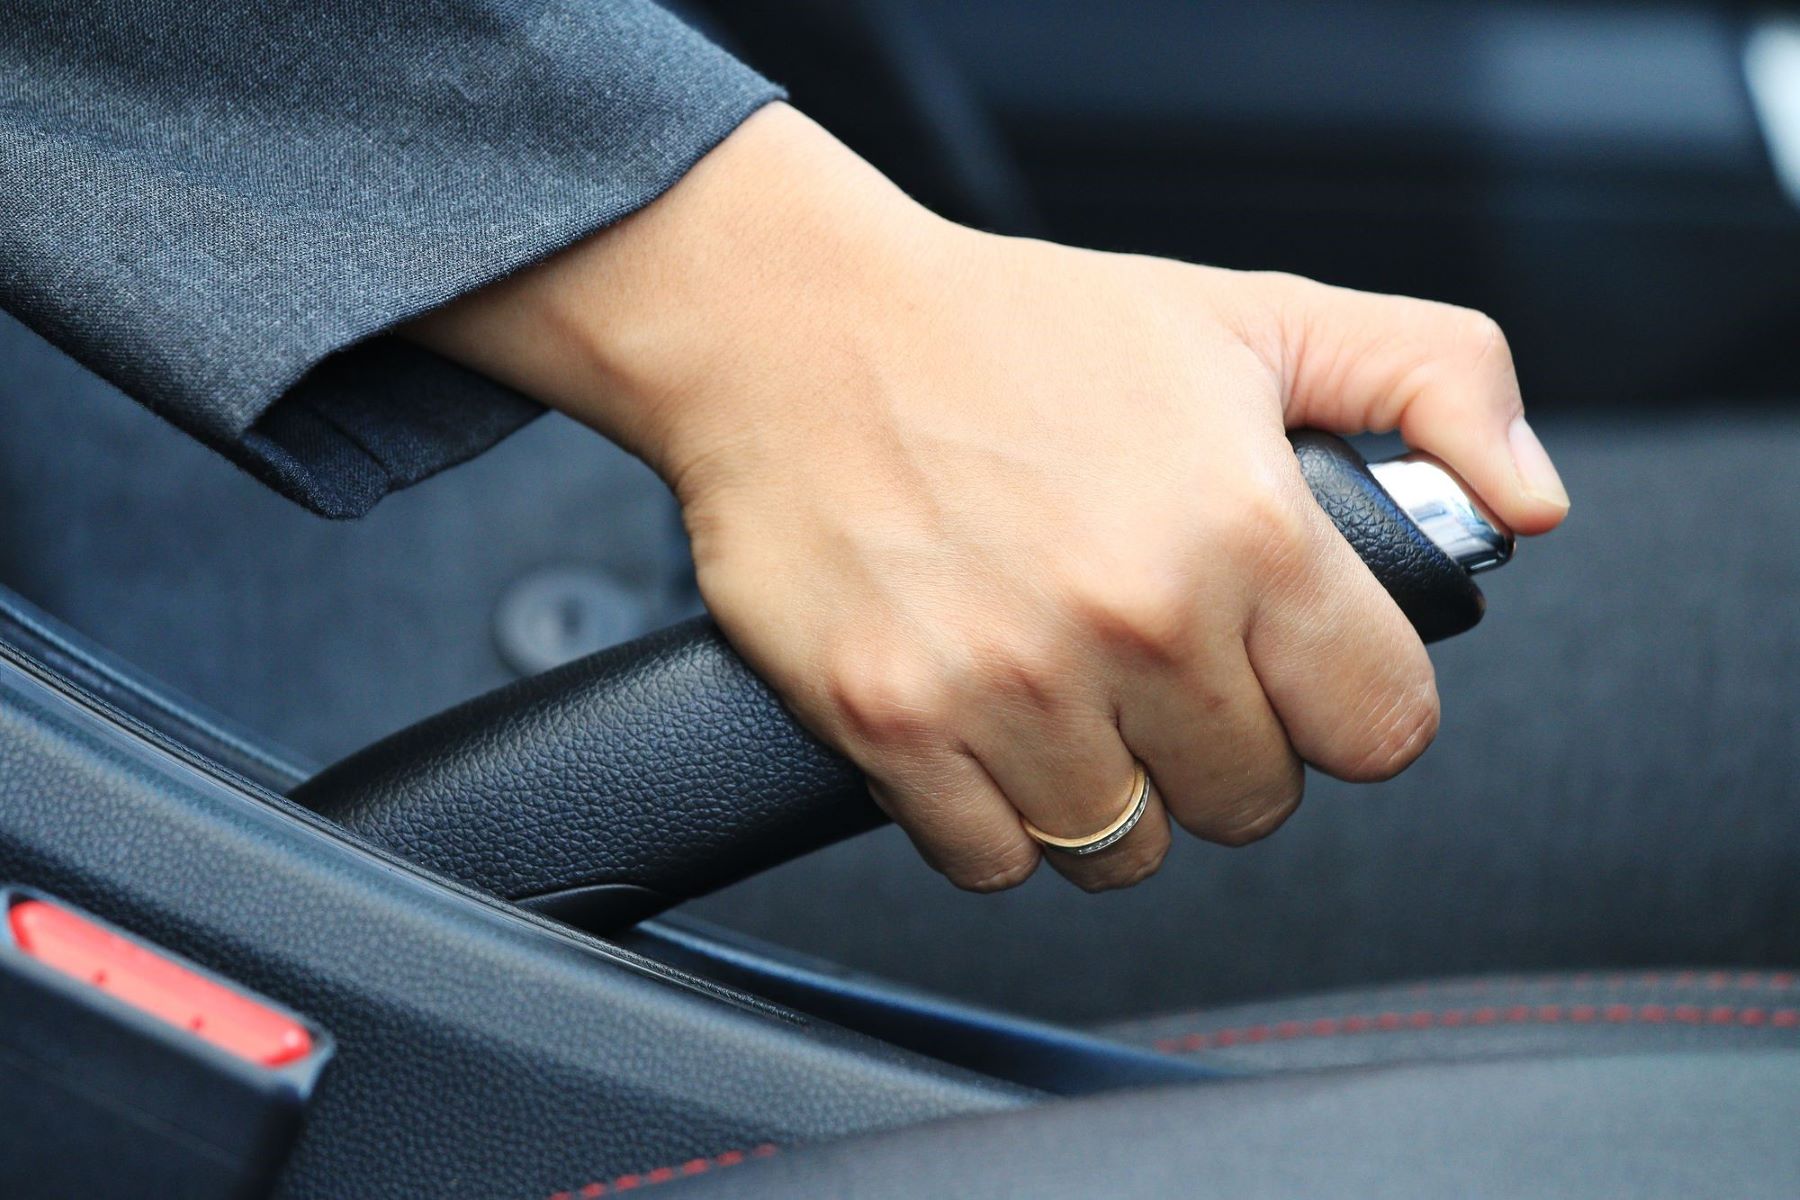 How To Release Your Parking Brake